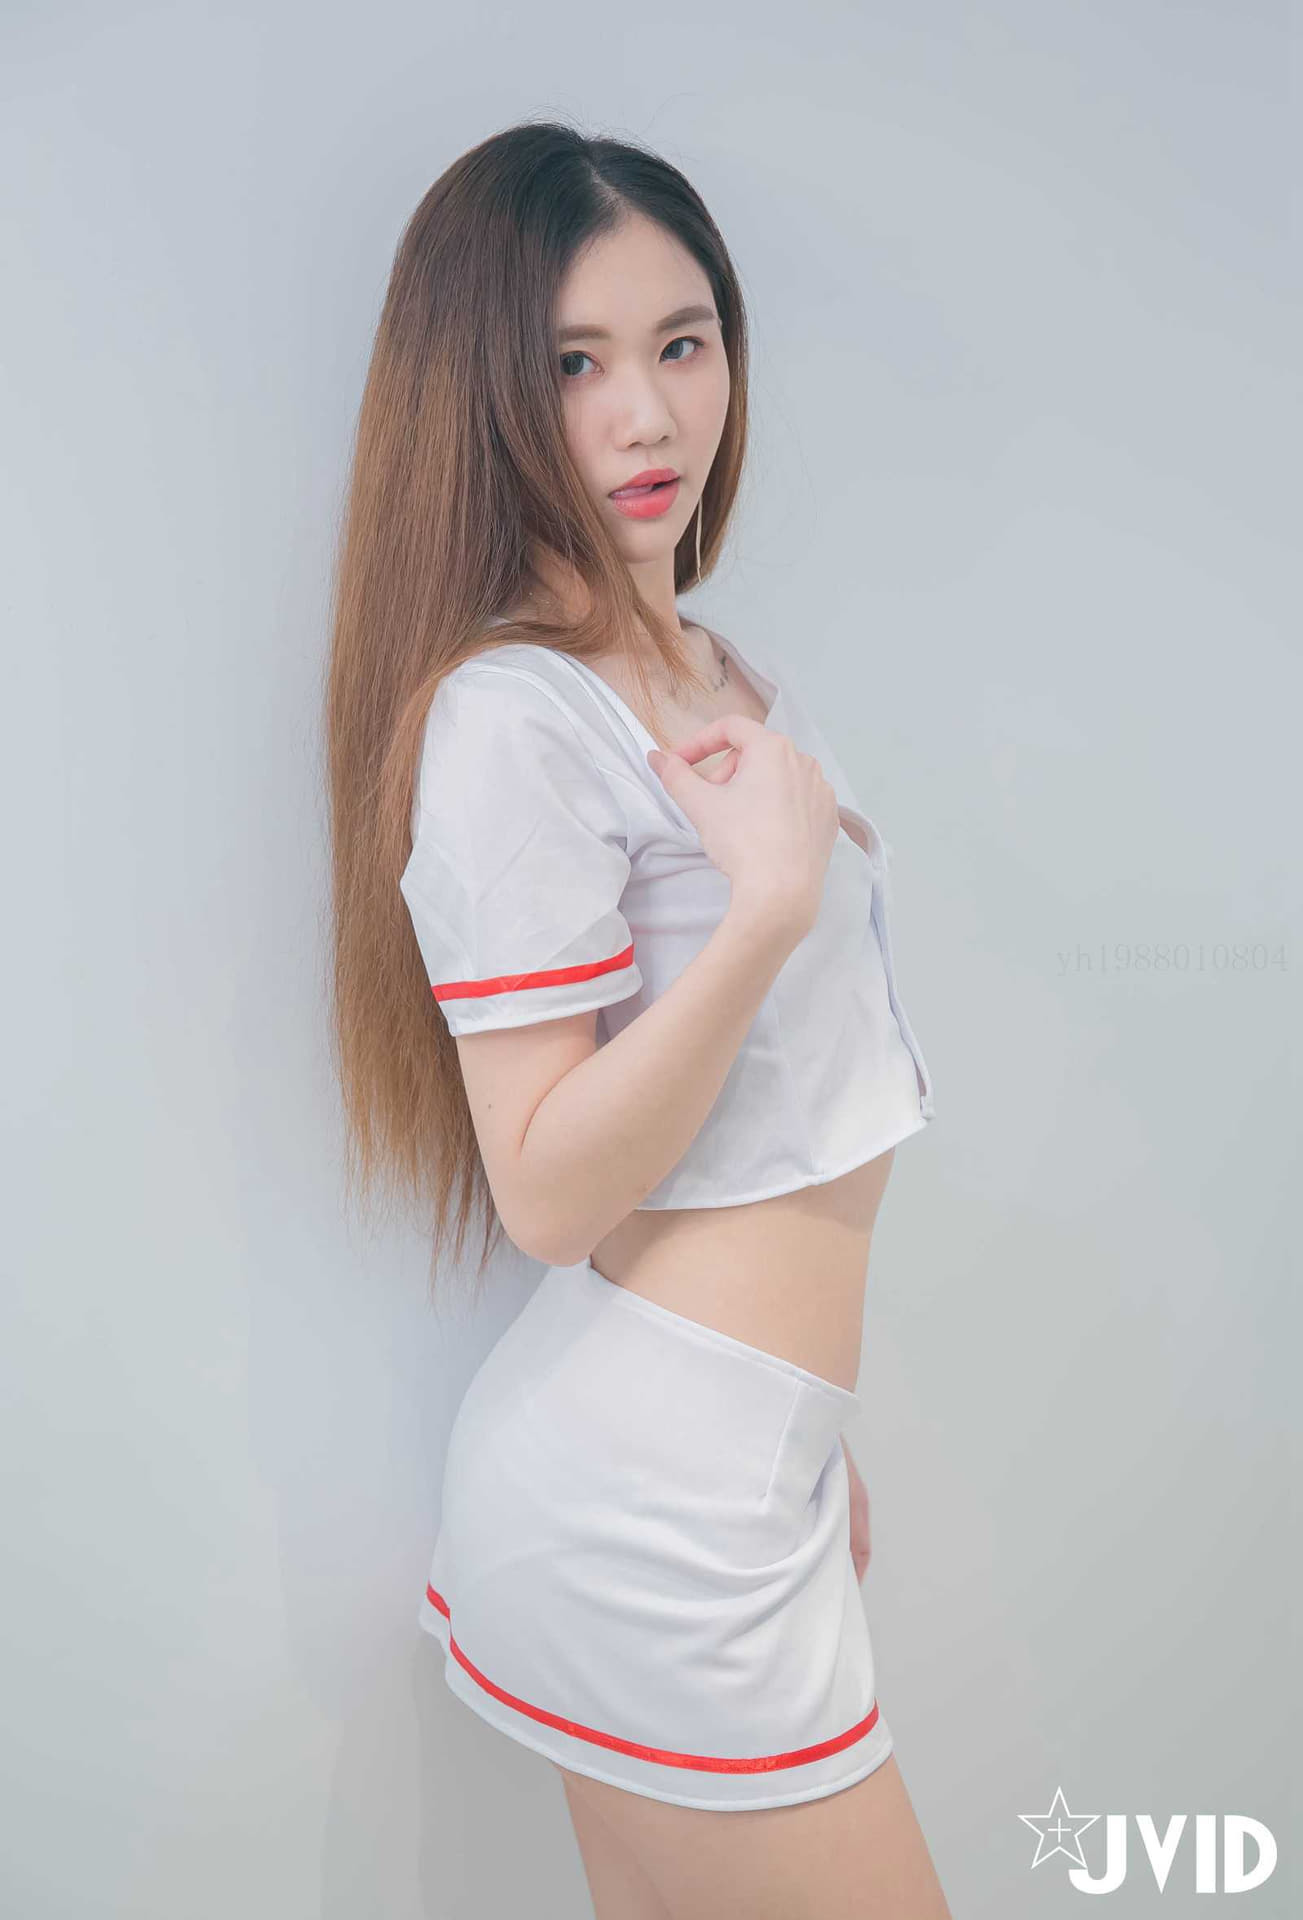 Yajie Evedie Jessica Luo Ying Stacy Kunna Unpublished Work-Super Beauty Nurse Sex Clinic